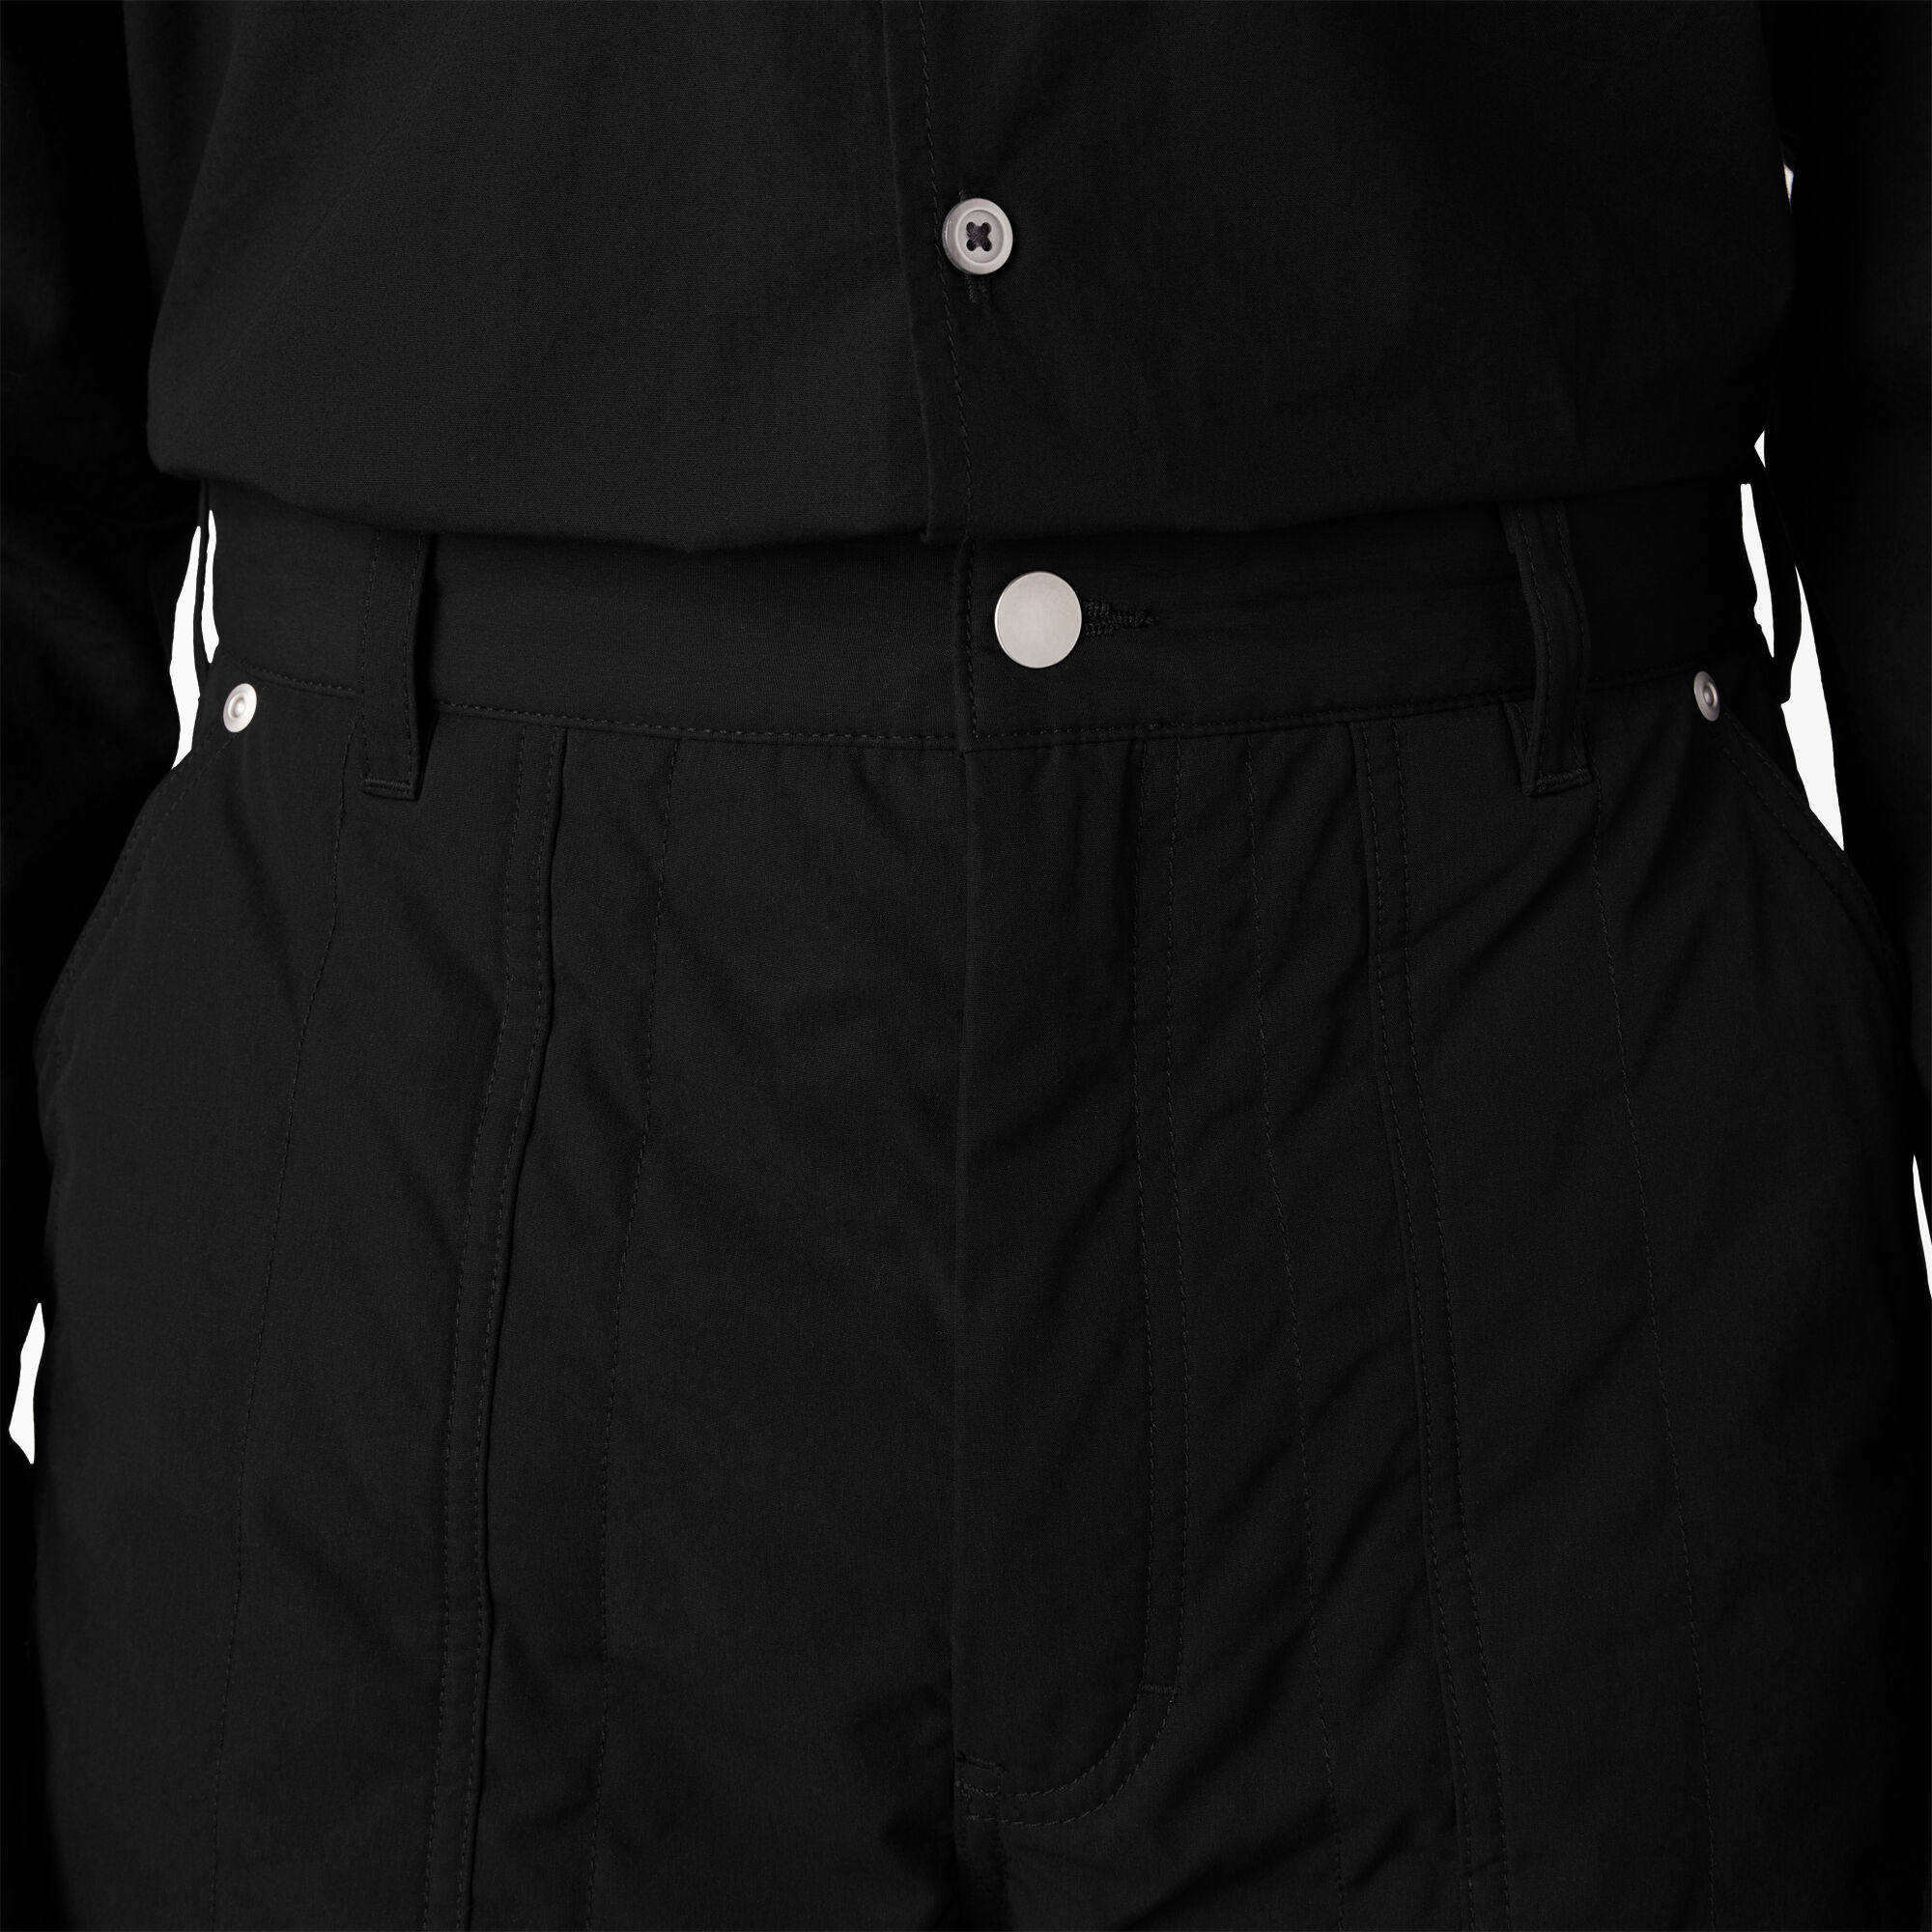 Dickies® Cargo Pants with Uniform Service